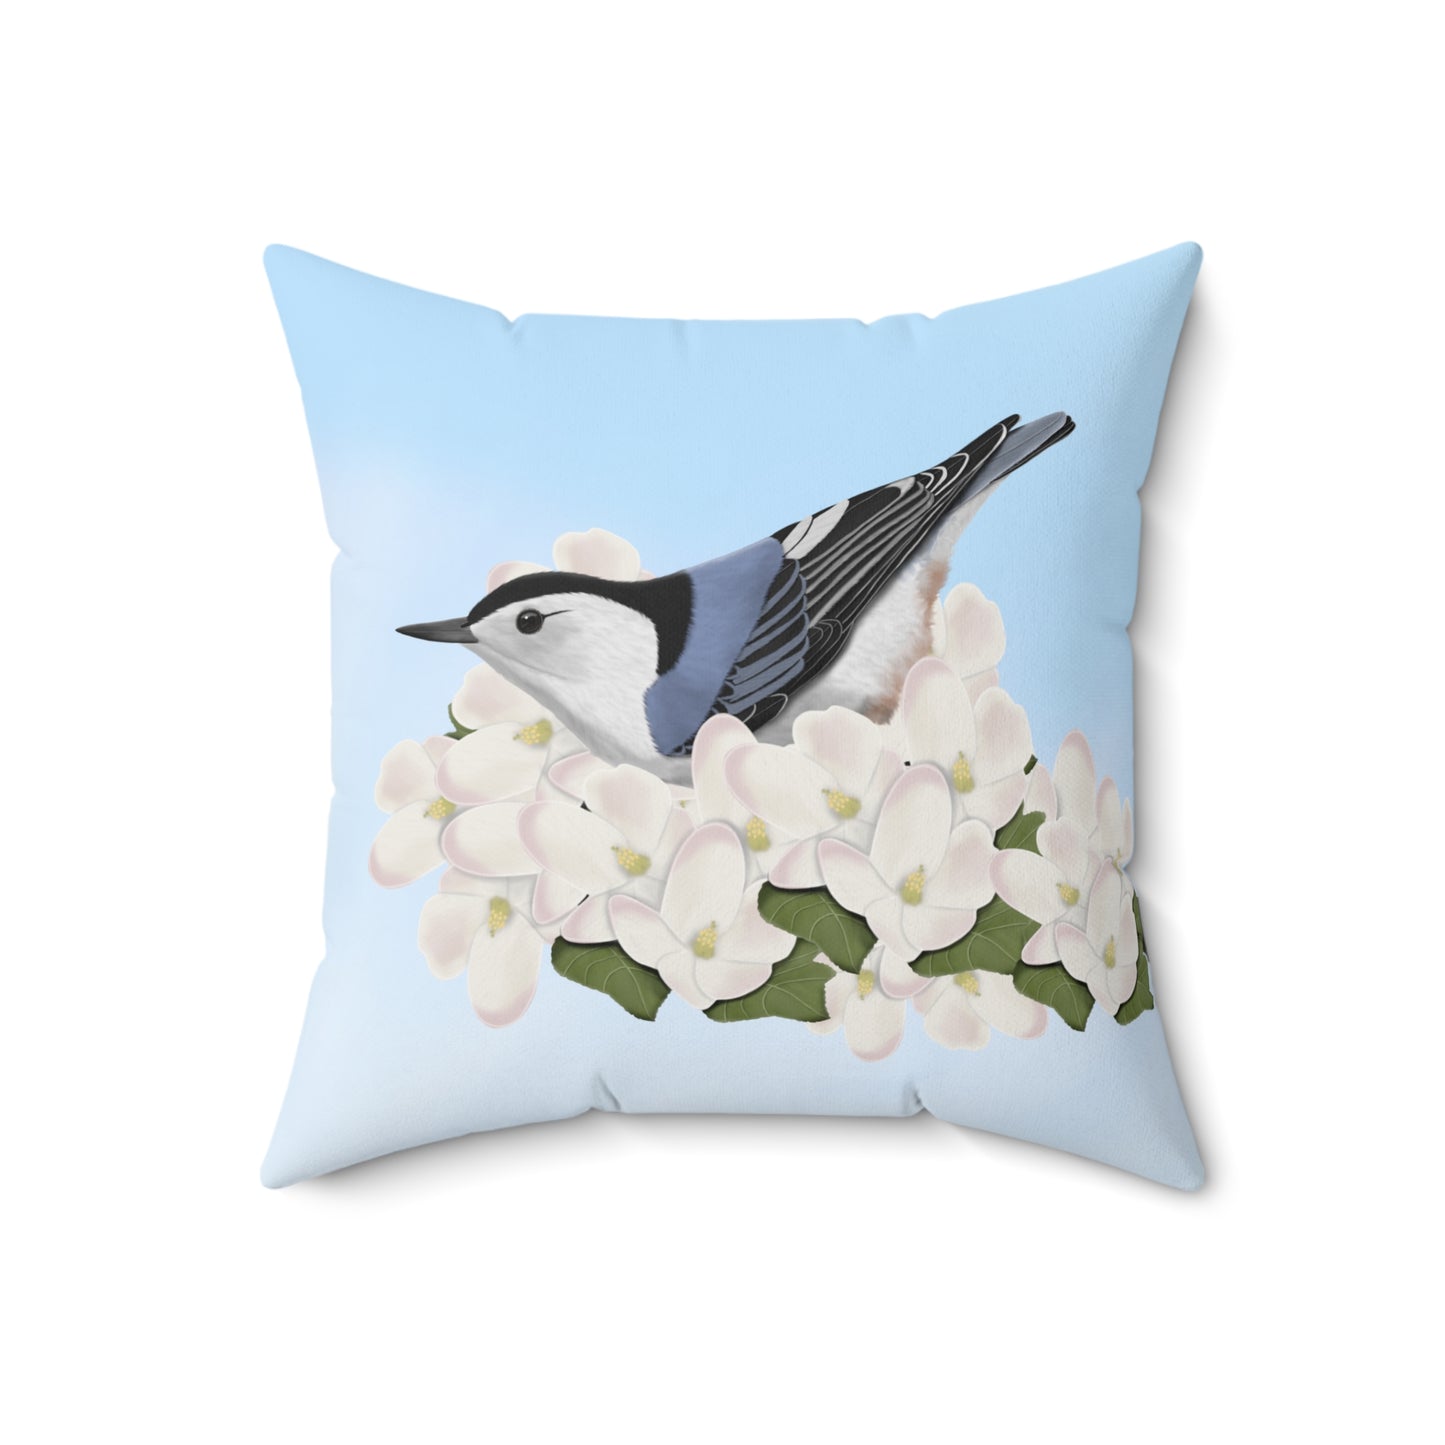 Nuthatch and Apple Blossoms Bird Throw Pillow 16"x16"